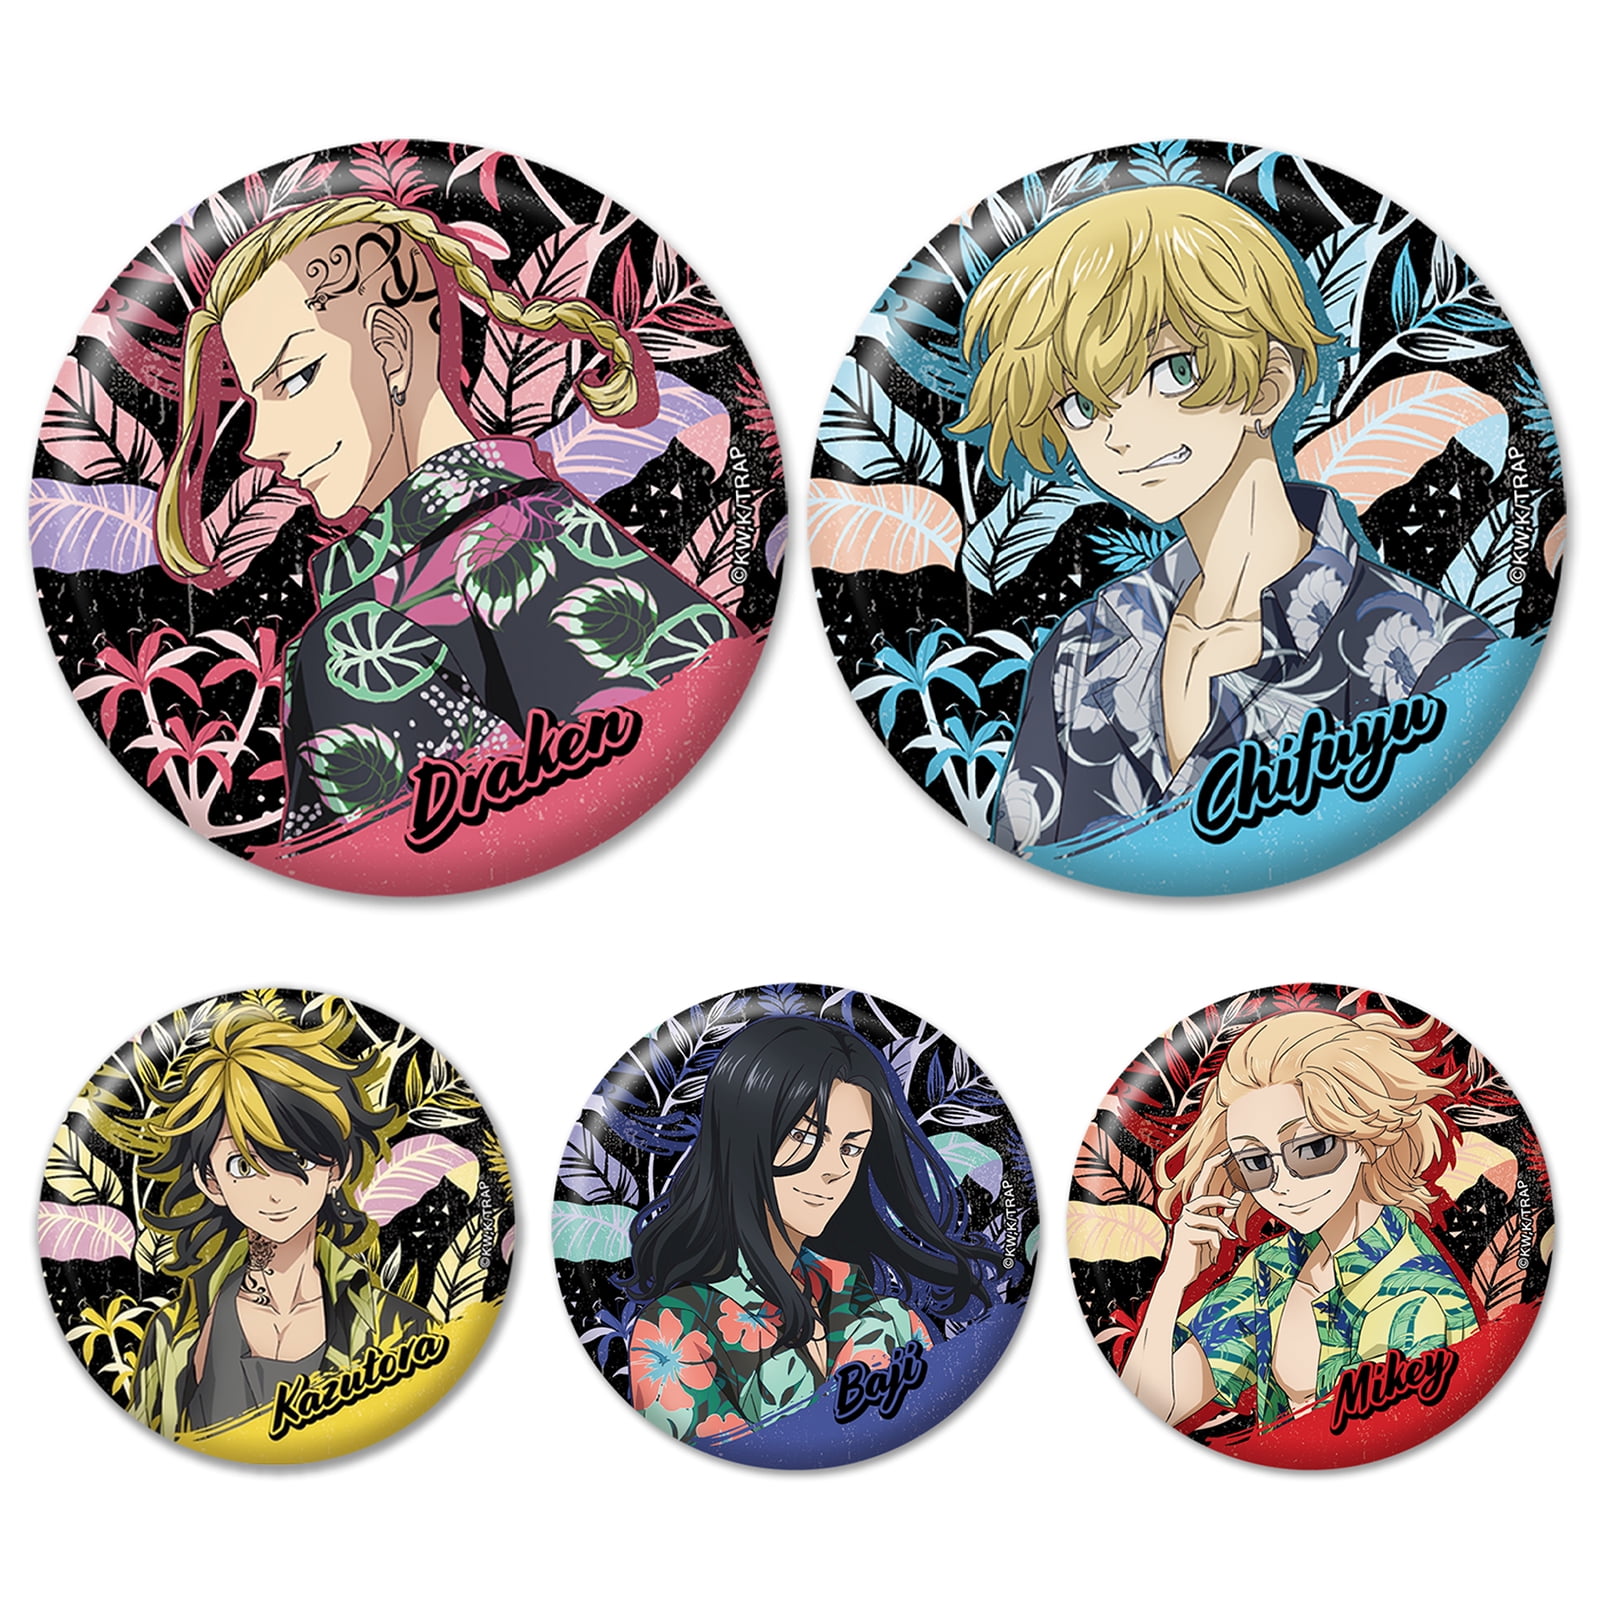 Anime Tokyo Revenger Baji Mikey Figure 1469 Badges Nonwoven Fabric Button  Brooch Pin Gifts Kids Toy